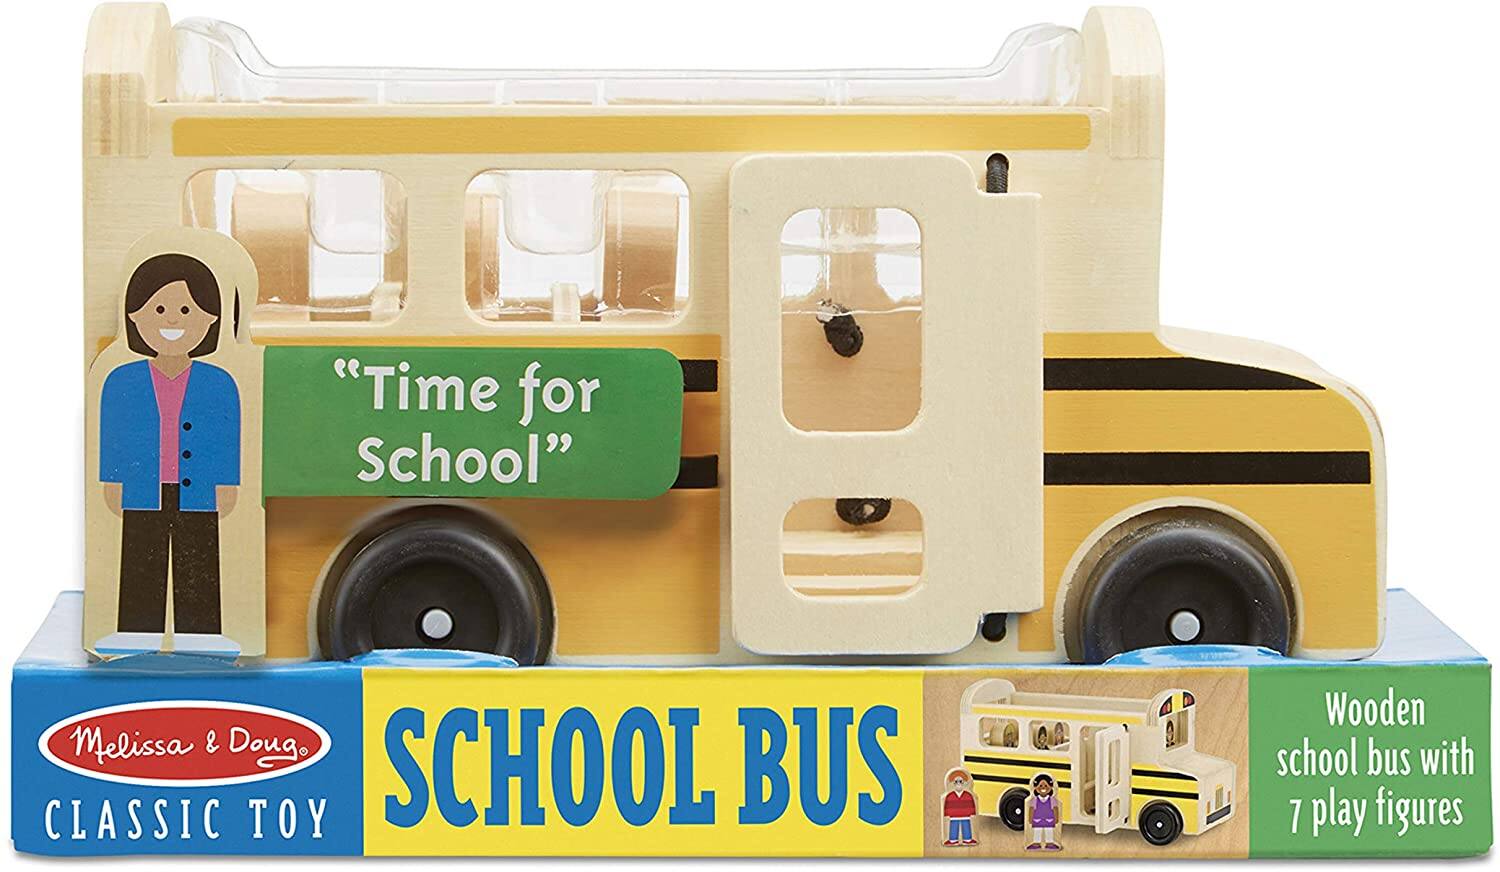 Melissa & Doug School Bus Wooden Playset w/ 7 Play Figures $11.25 + Free S&H w/ Prime or $25+